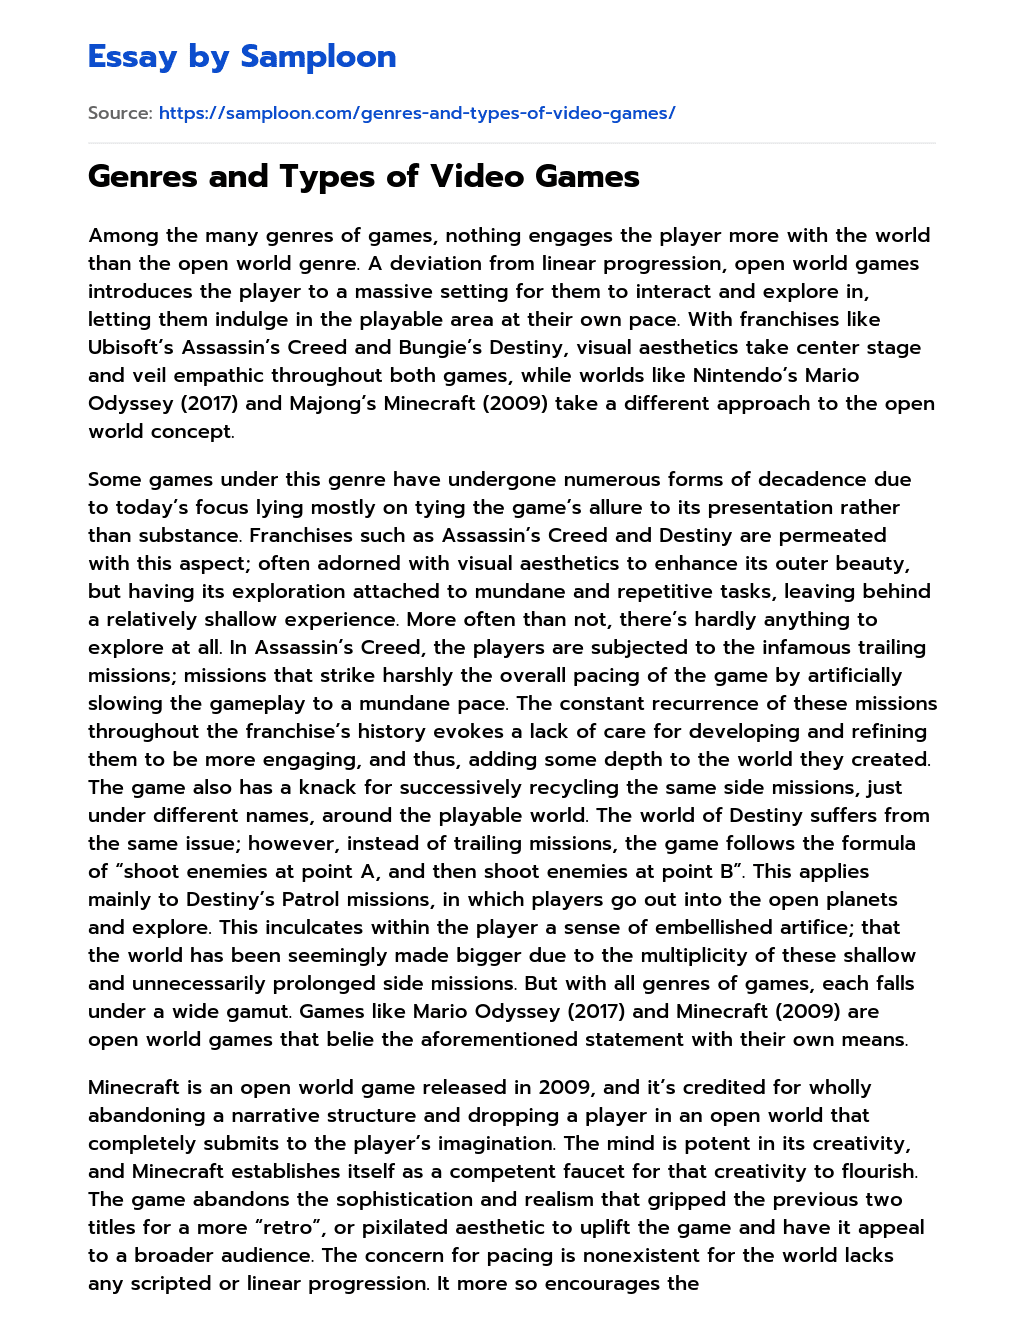 Genres and Types of Video Games essay